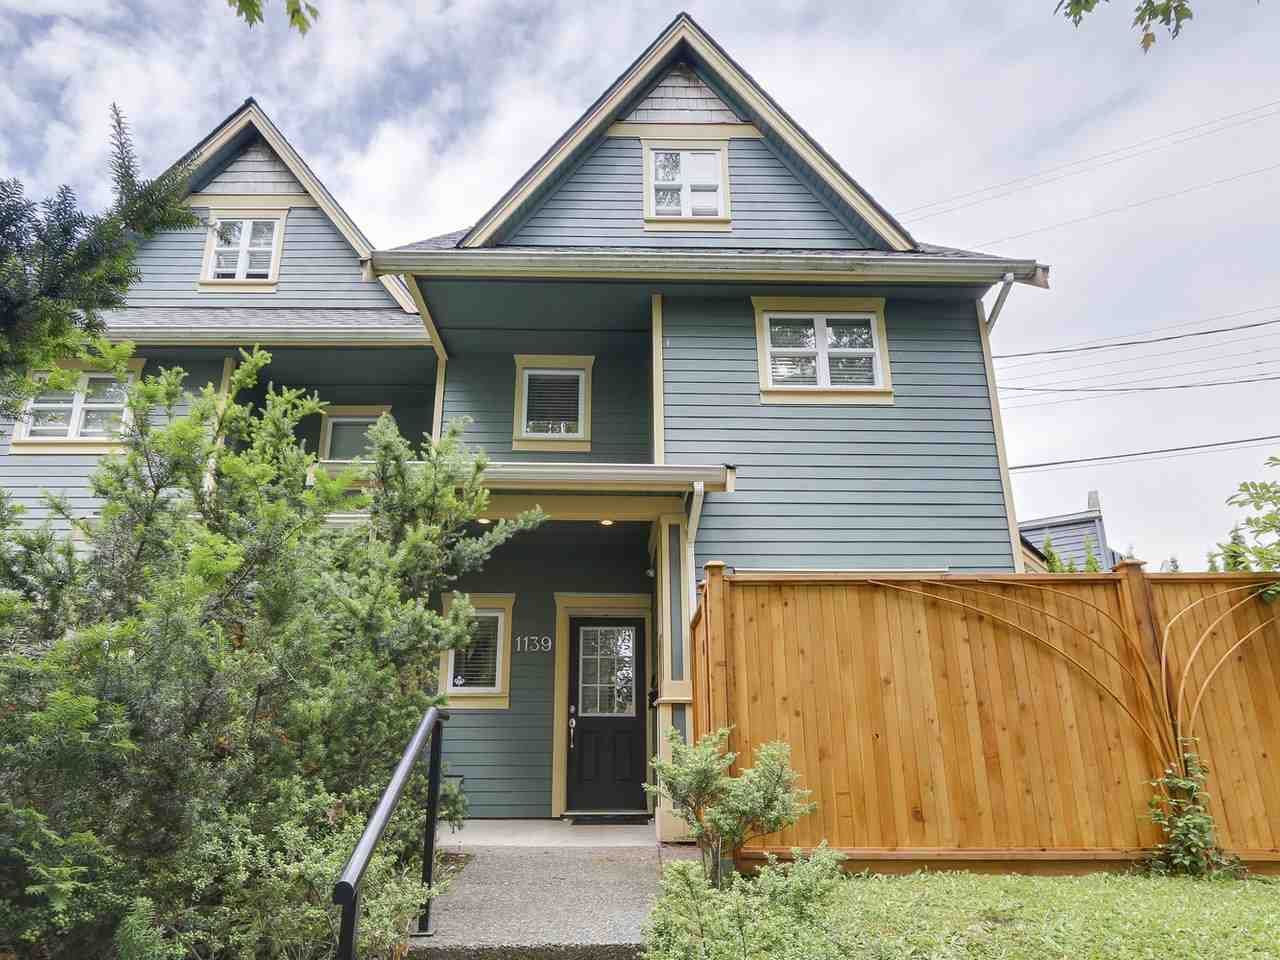 Main Photo: 1139 E 21ST Avenue in Vancouver: Knight 1/2 Duplex for sale (Vancouver East)  : MLS®# R2180419